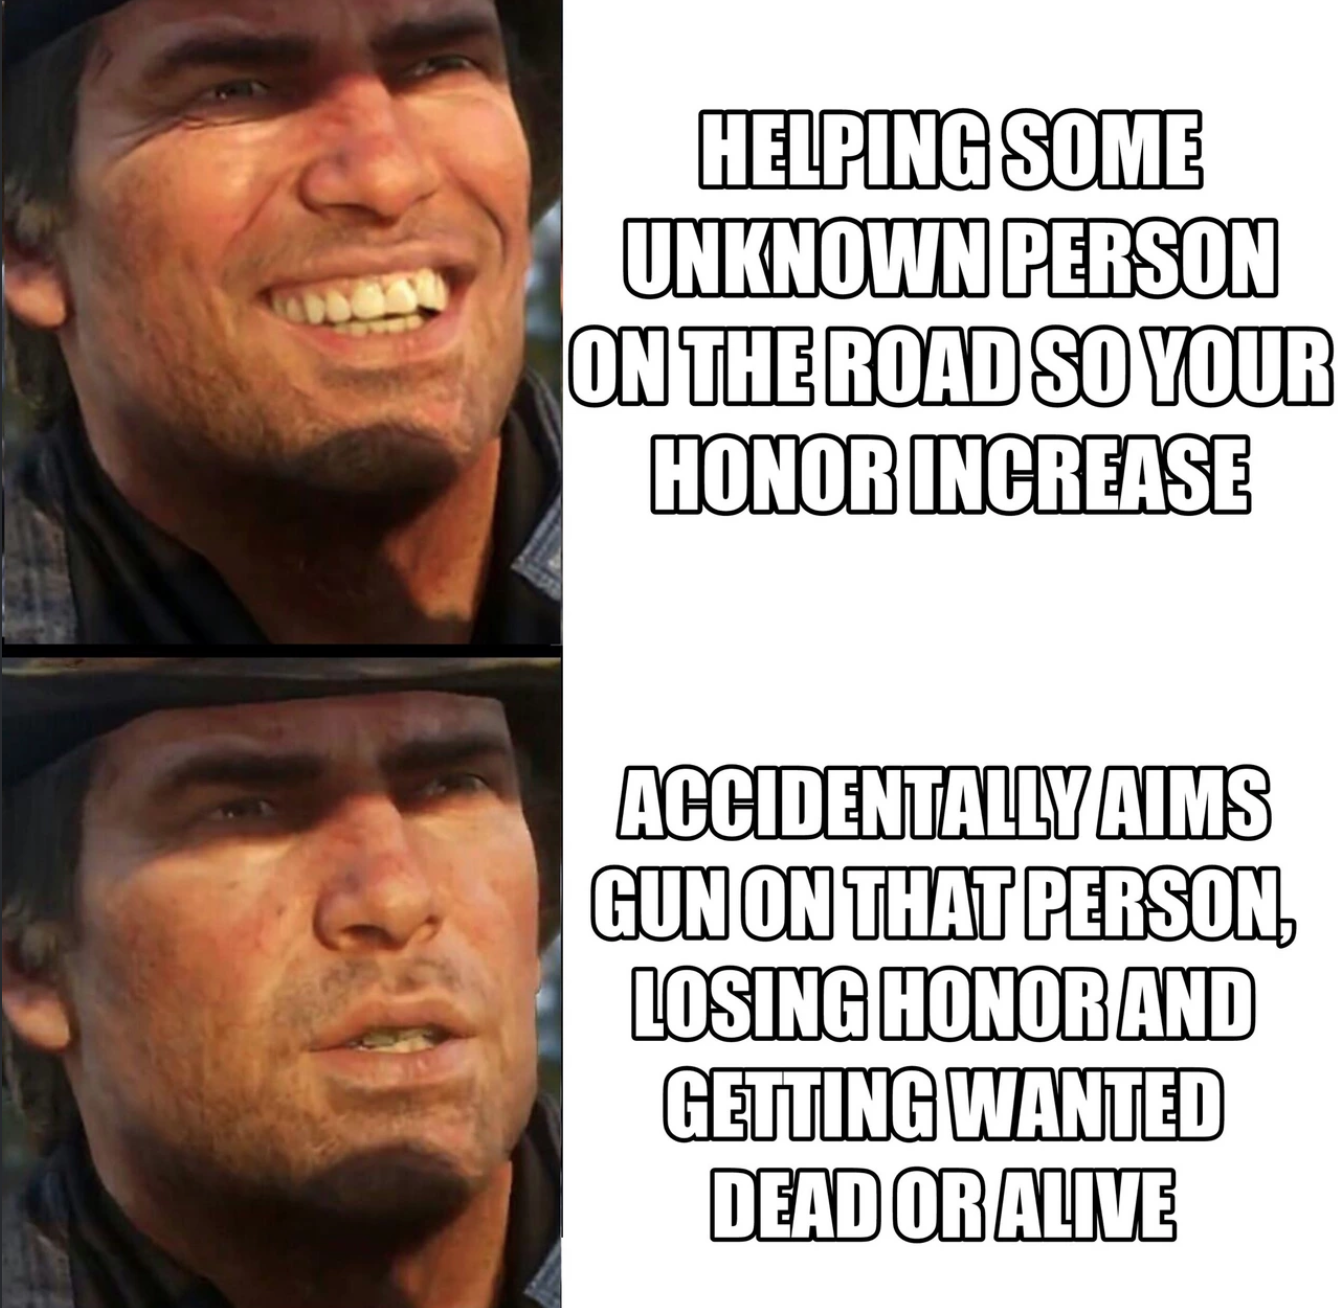 gaming memes and pics - memes rdr2 - Helping Some Unknown Person On The Road So Your Honor Increase Accidentally Aims Gun On That Person Losing Honor And Getting Wanted Dead Or Alive